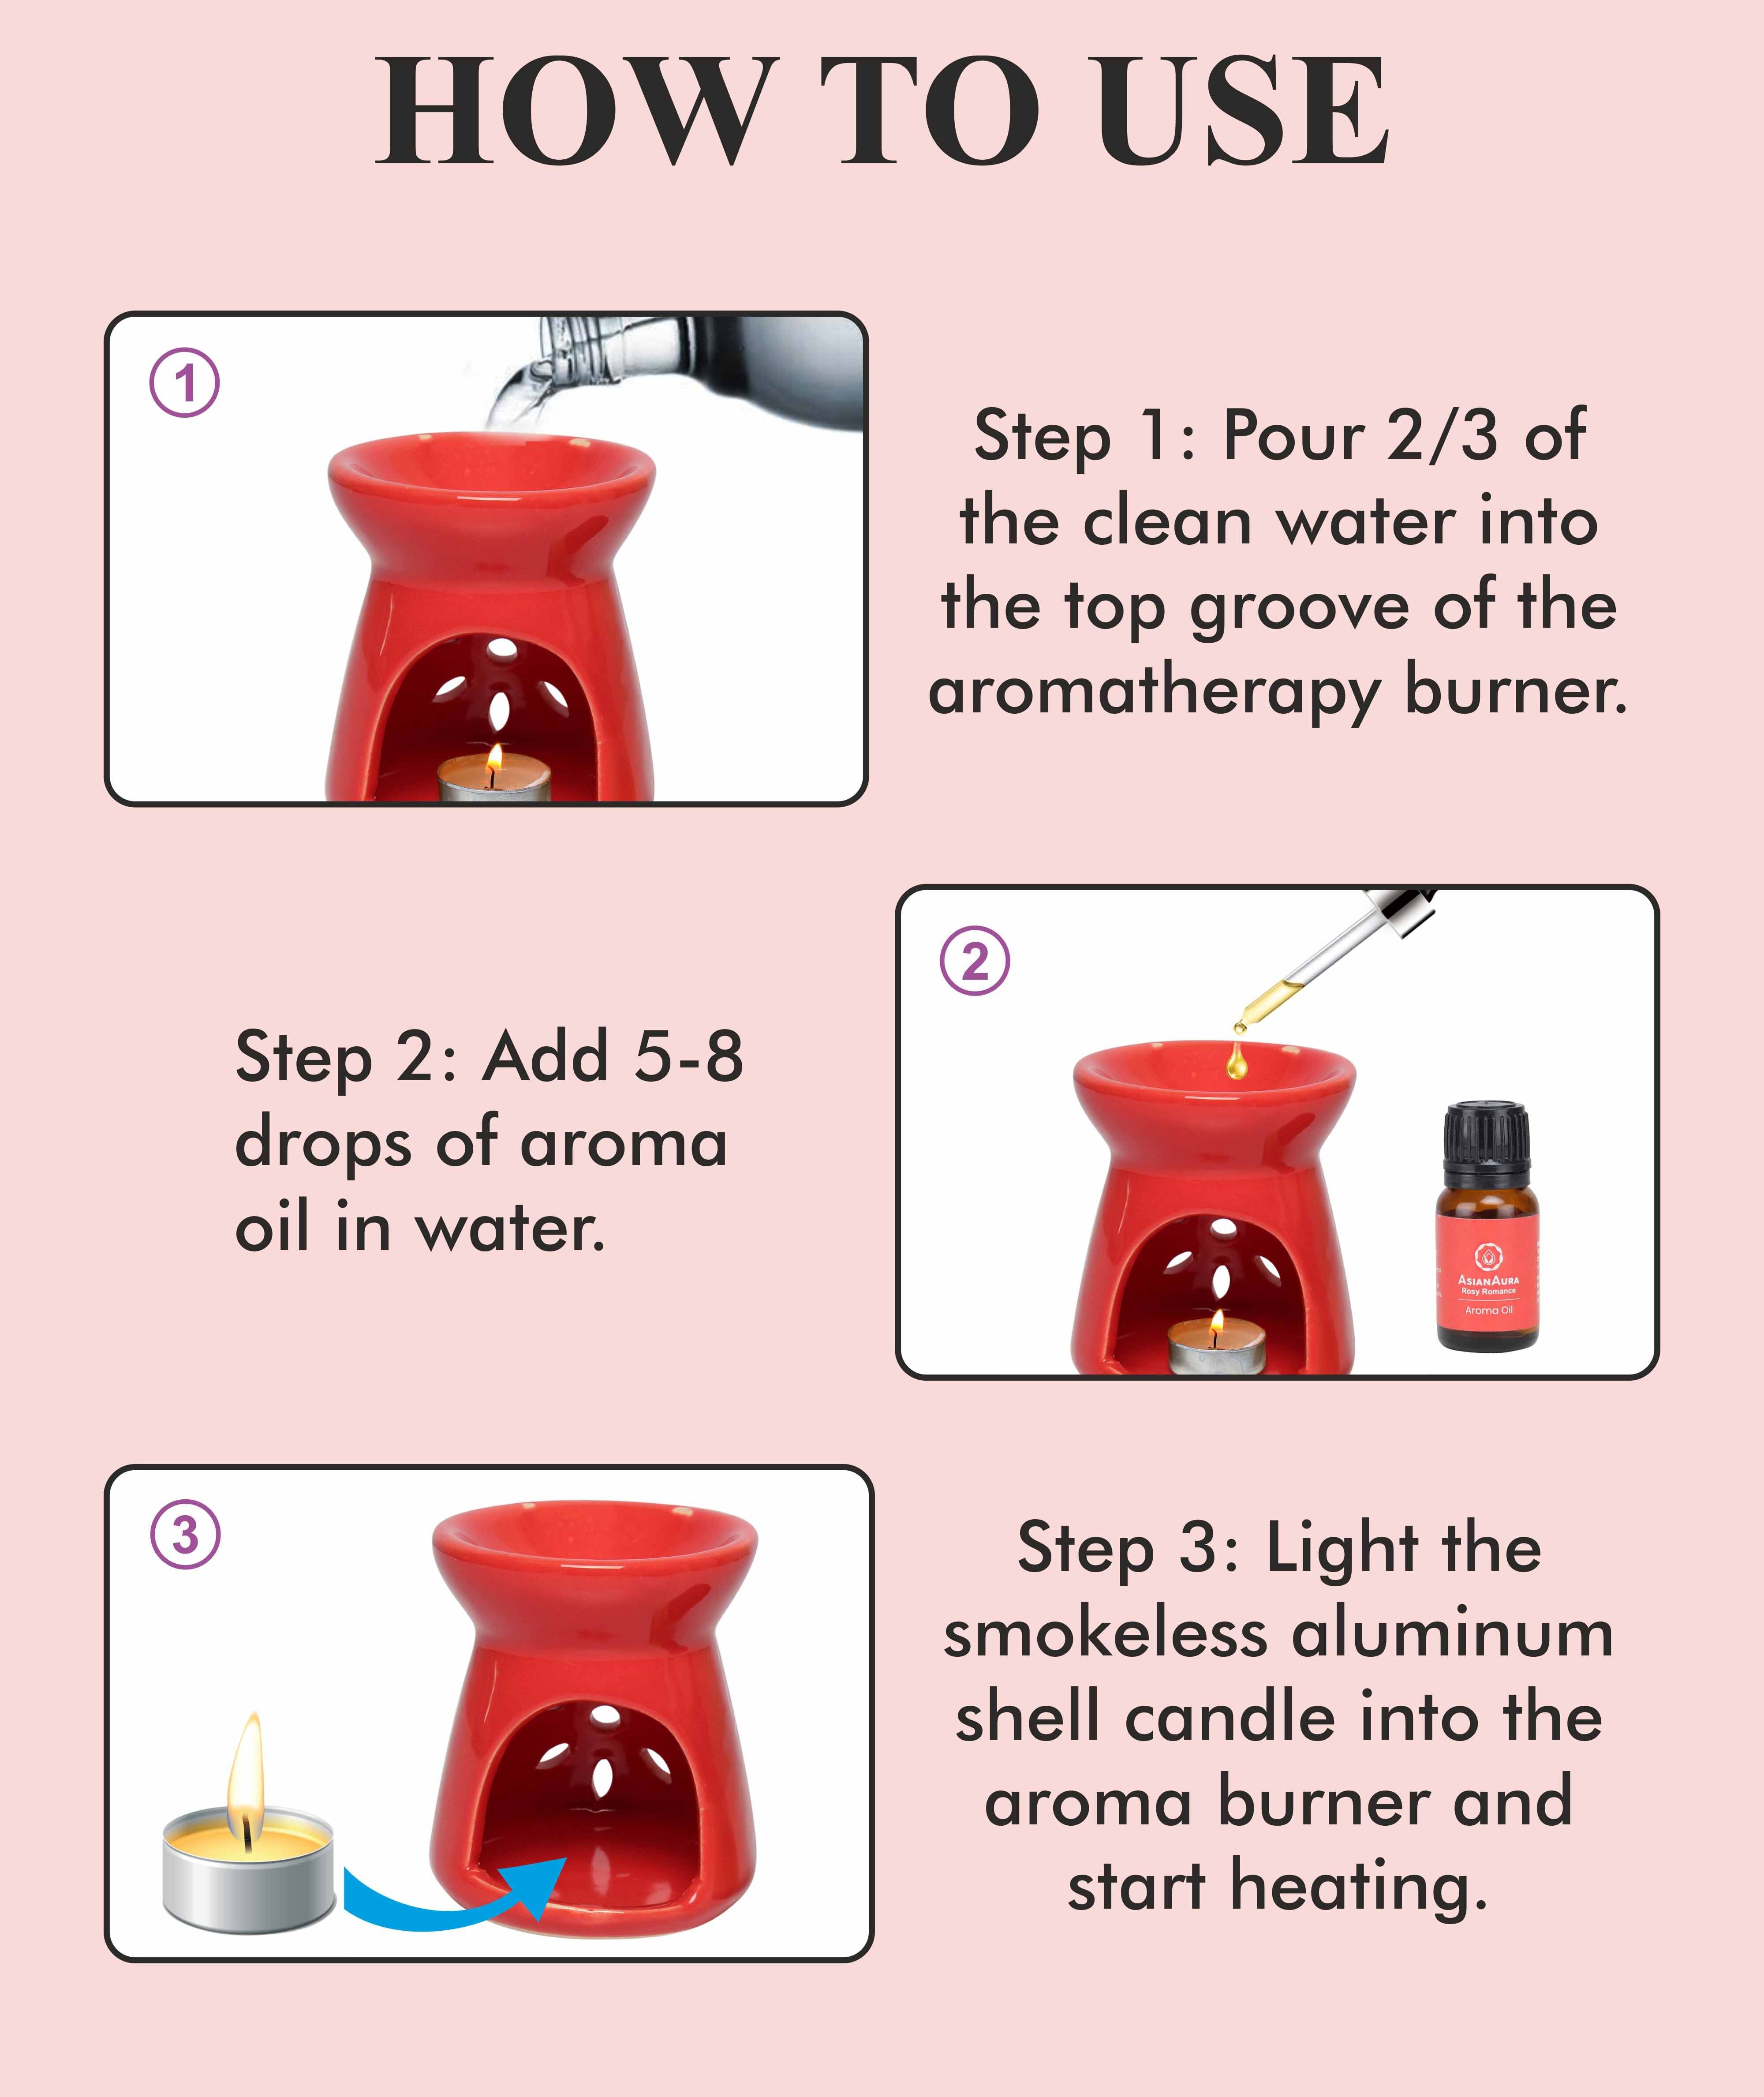 Asian Aura Ceramic Aromatic Oil Diffuser with 2 oil bottles AA-CB-0043Red